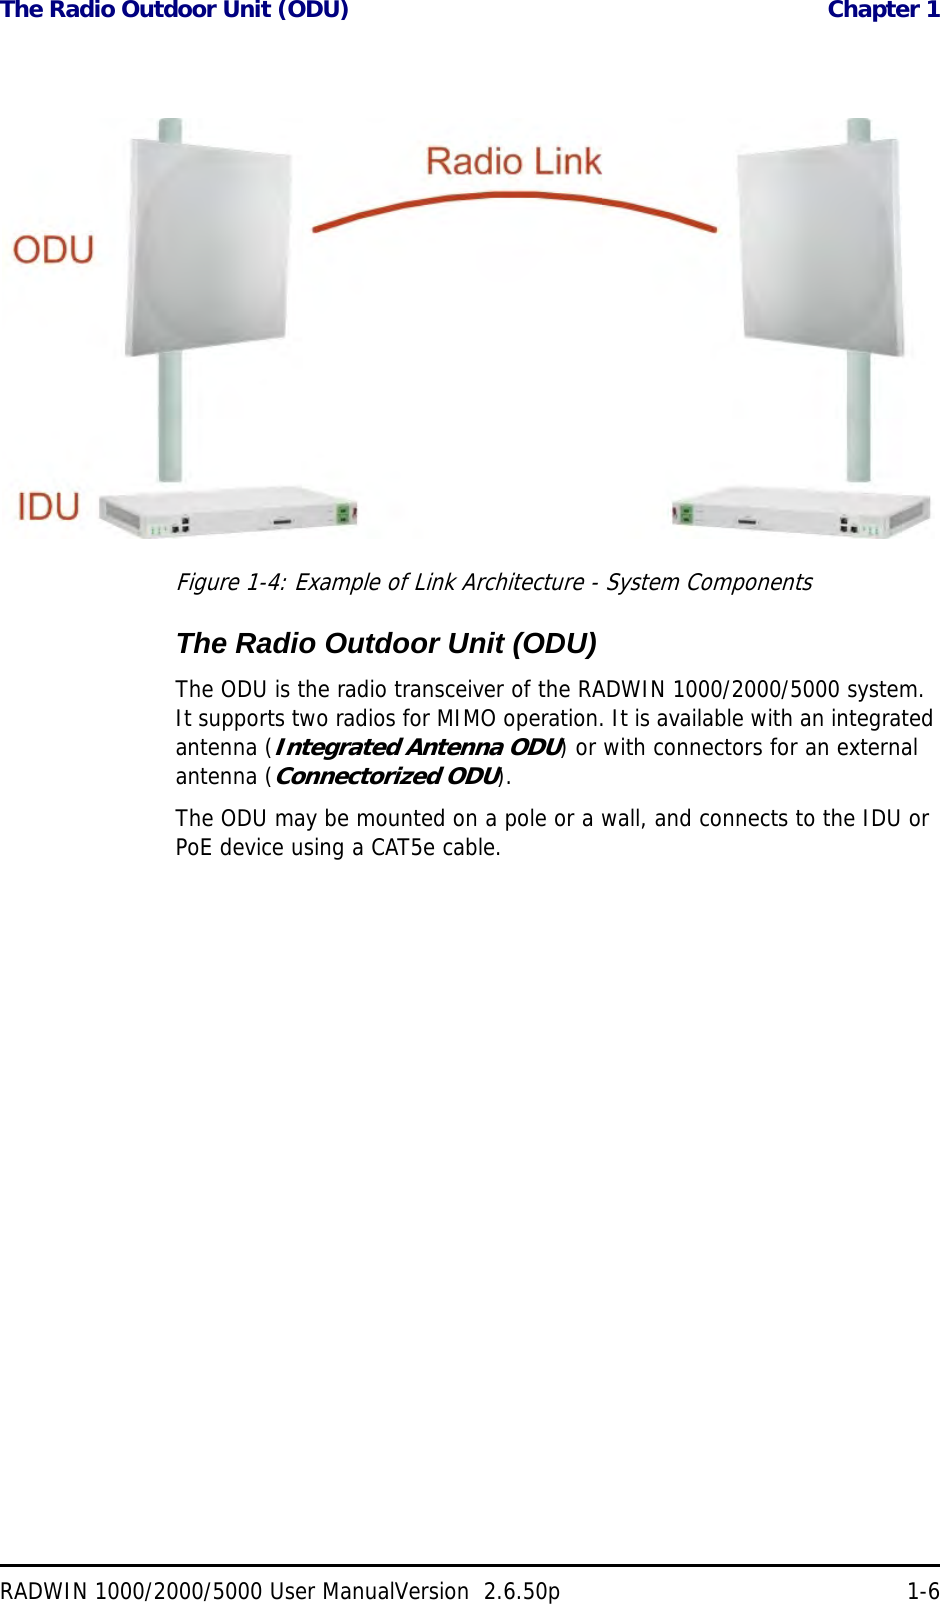 The Radio Outdoor Unit (ODU)  Chapter 1RADWIN 1000/2000/5000 User ManualVersion  2.6.50p 1-6Figure 1-4: Example of Link Architecture - System ComponentsThe Radio Outdoor Unit (ODU)The ODU is the radio transceiver of the RADWIN 1000/2000/5000 system. It supports two radios for MIMO operation. It is available with an integrated antenna (Integrated Antenna ODU) or with connectors for an external antenna (Connectorized ODU).The ODU may be mounted on a pole or a wall, and connects to the IDU or PoE device using a CAT5e cable.